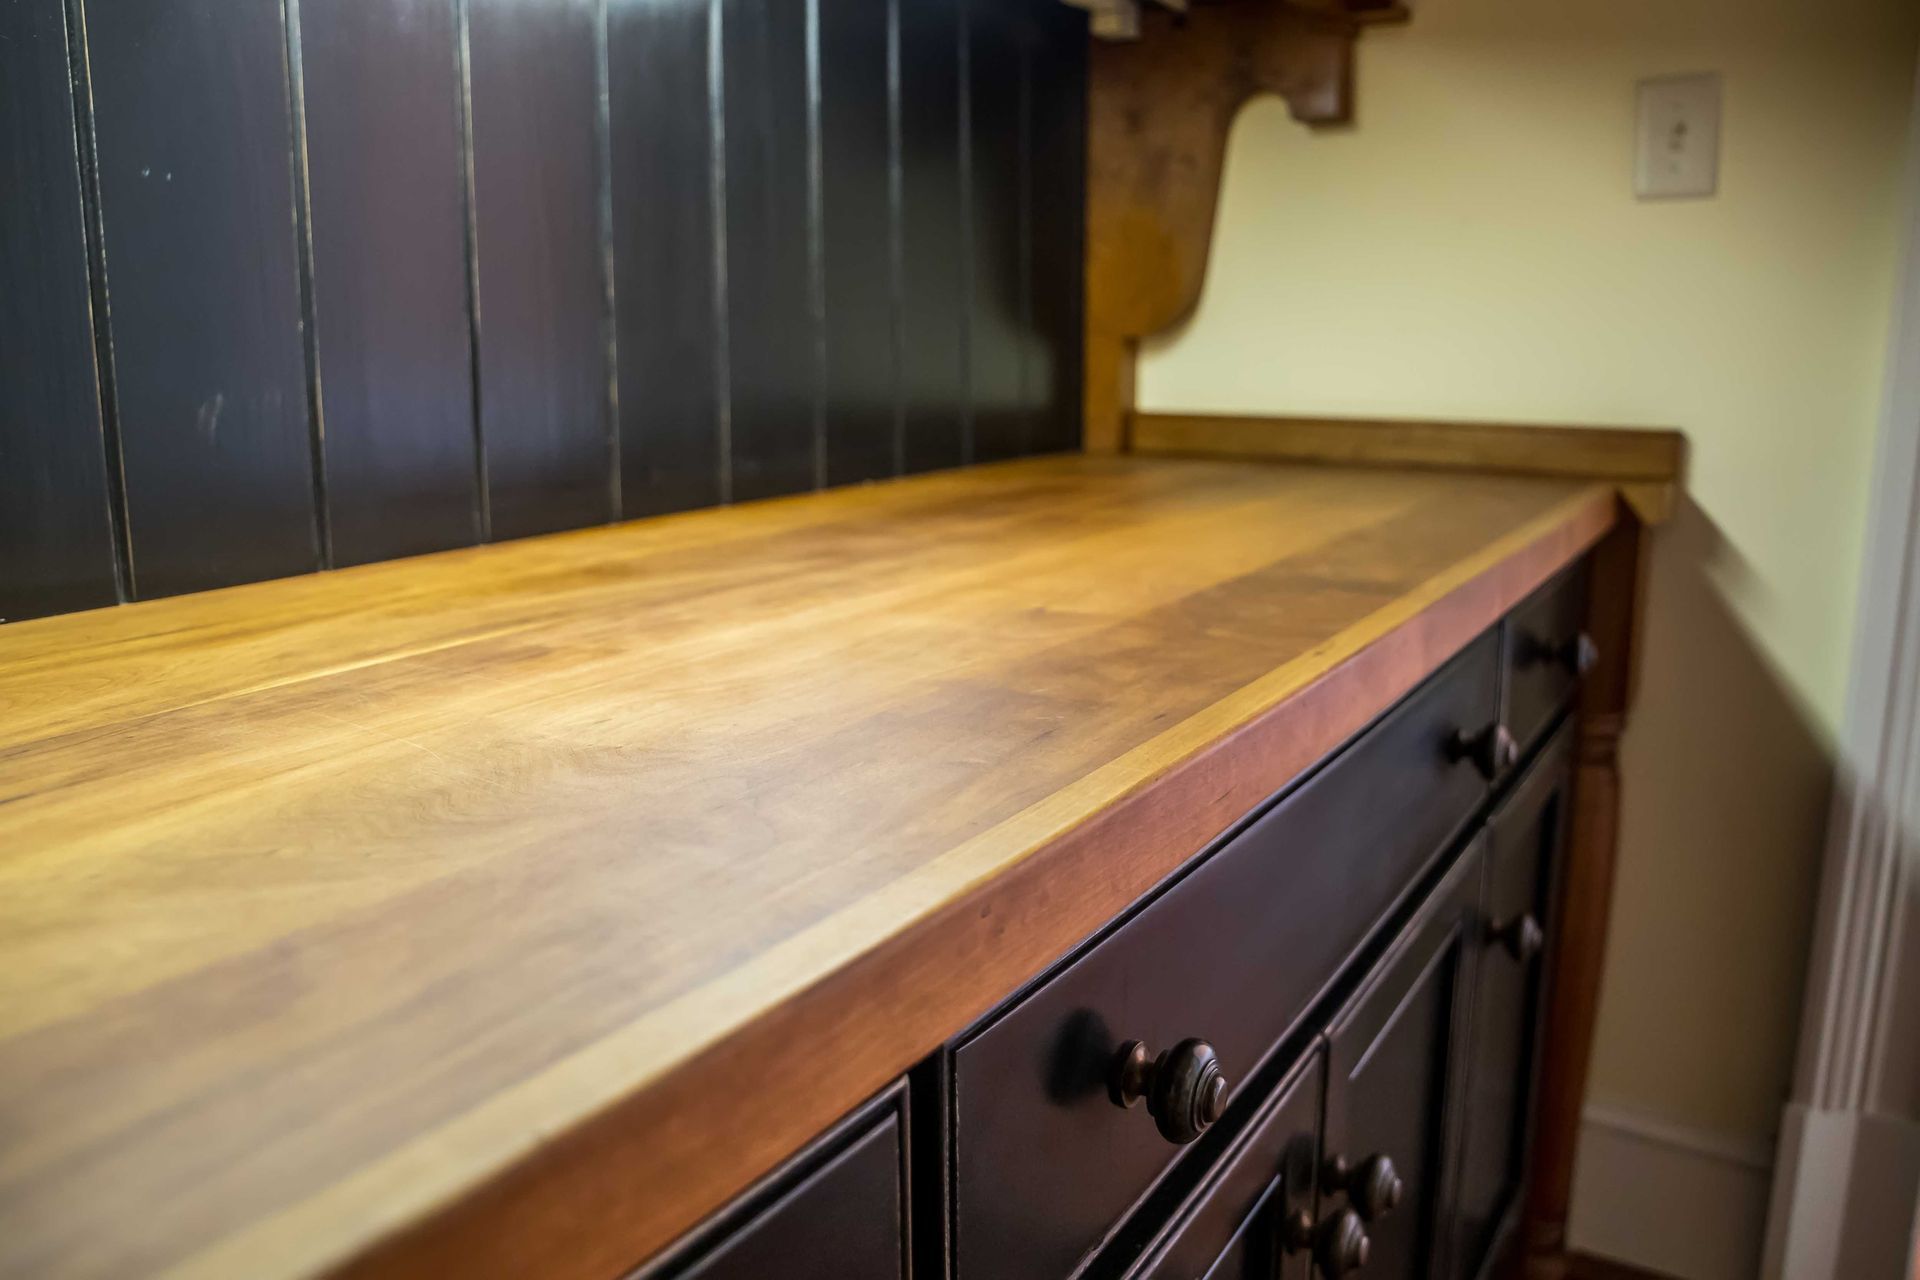 A project featuring cabinet doors painted a dark brown color